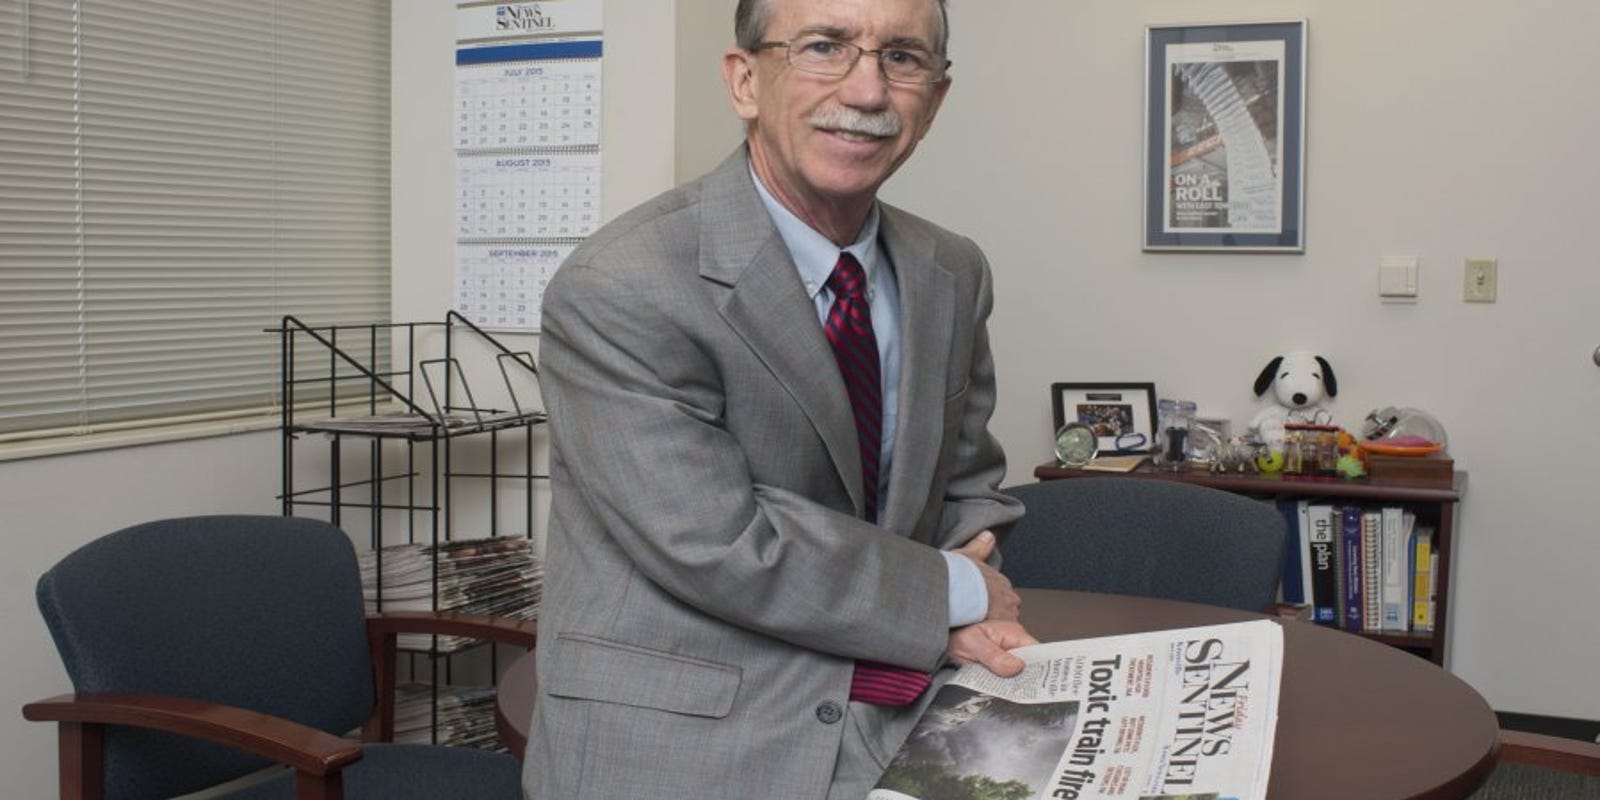 Jack Mcelroy Gannett S Acquisition Of Knoxville News Sentinel